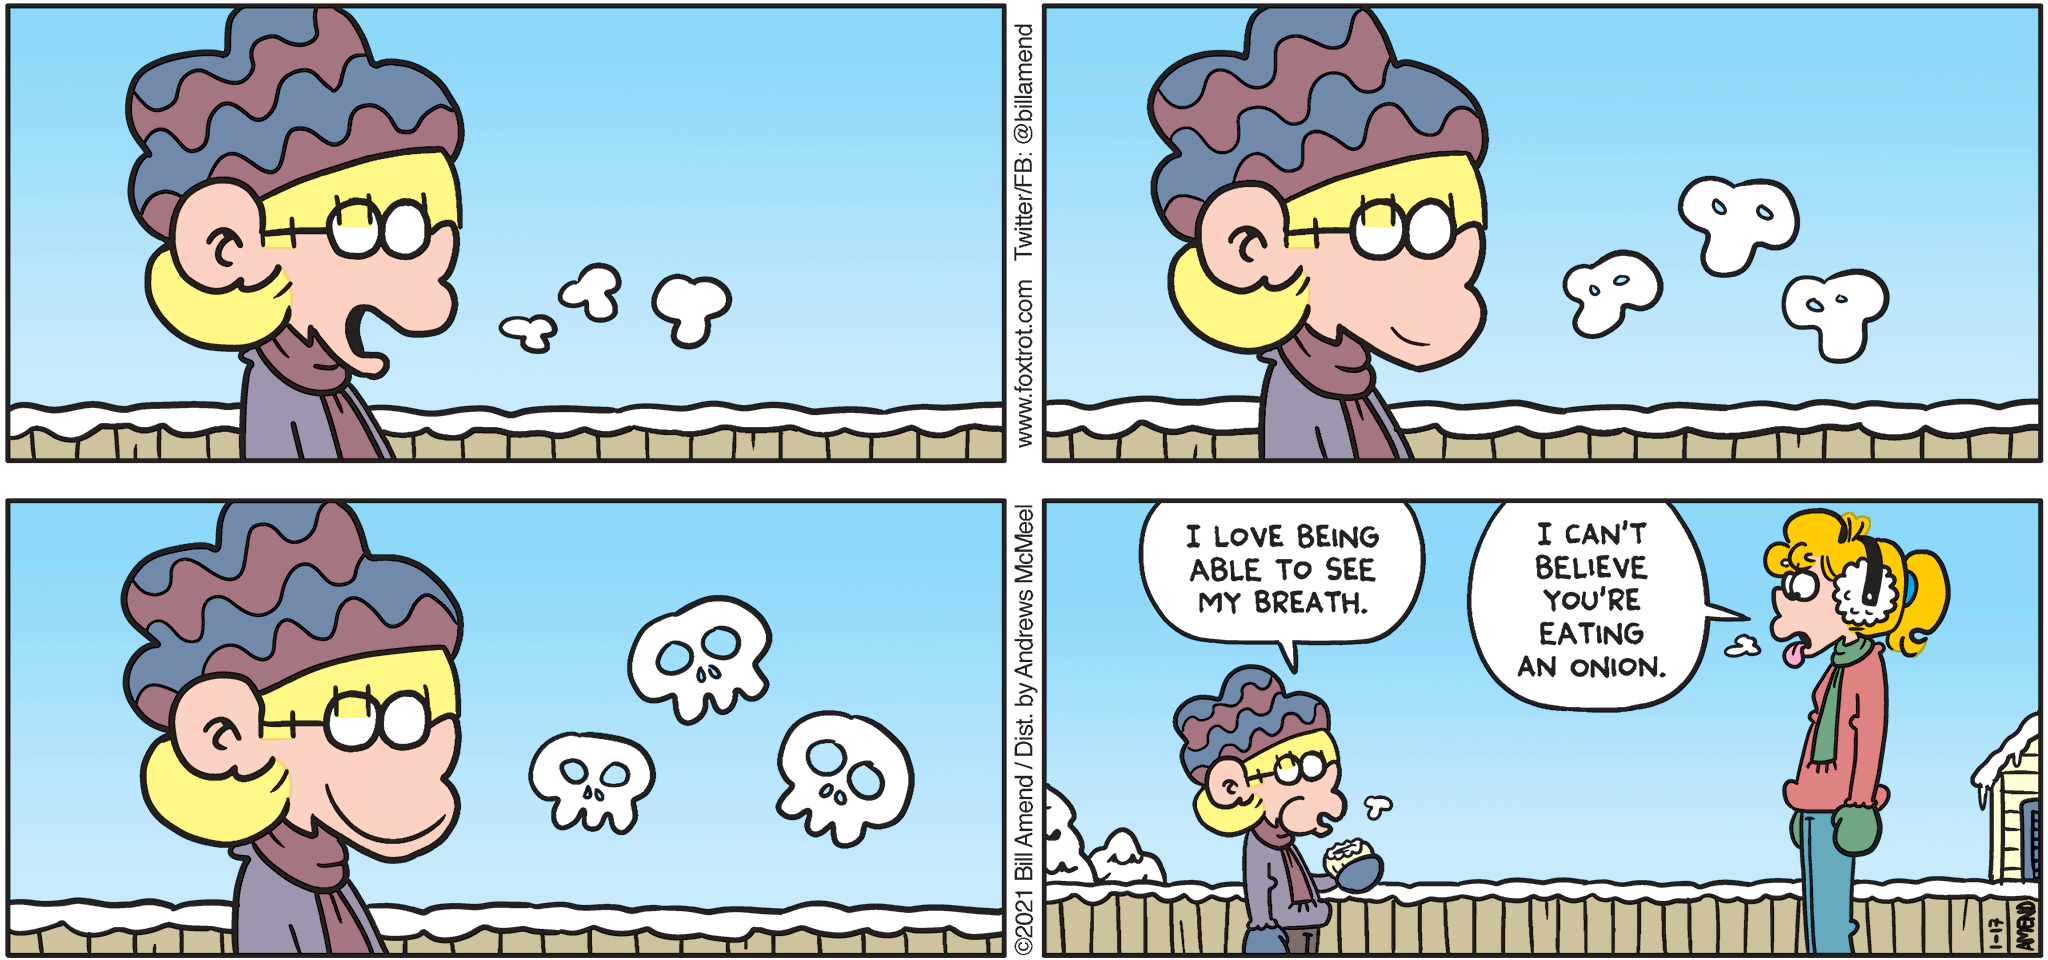 FoxTrot comic strip by Bill Amend - "Death Breath" published January 17, 2021 - Jason Fox: I love being able to see my breath. Paige Fox: I can't believe you're eating an onion. 